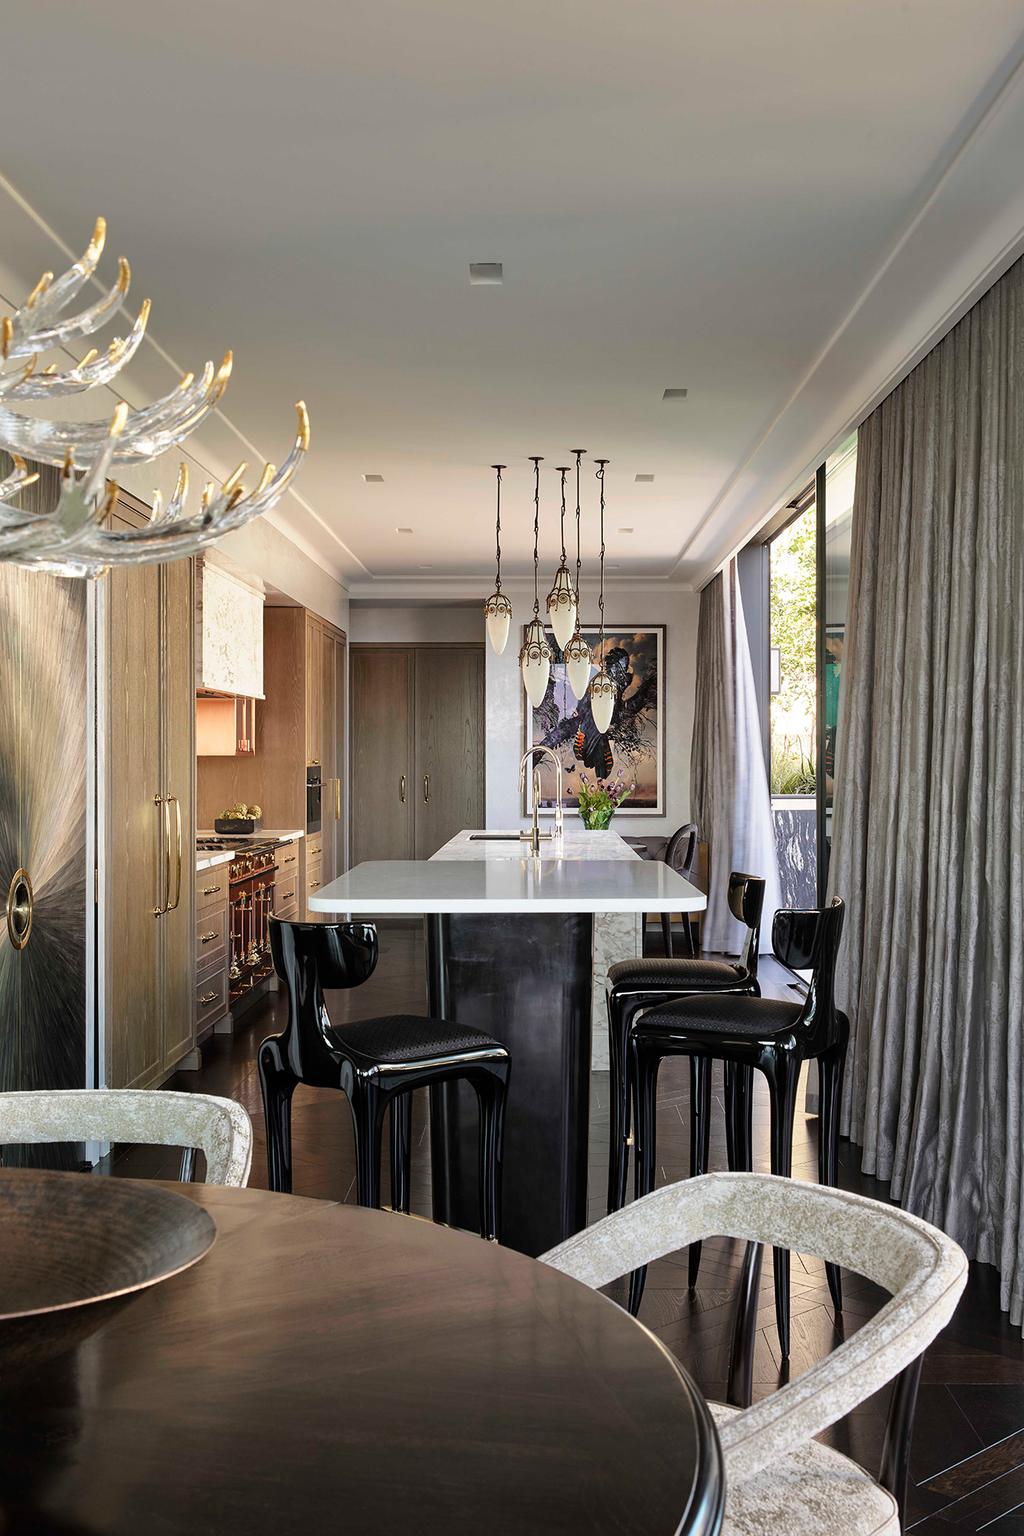 sophisticated kitchen with a luxurious eclectic mix of furniture